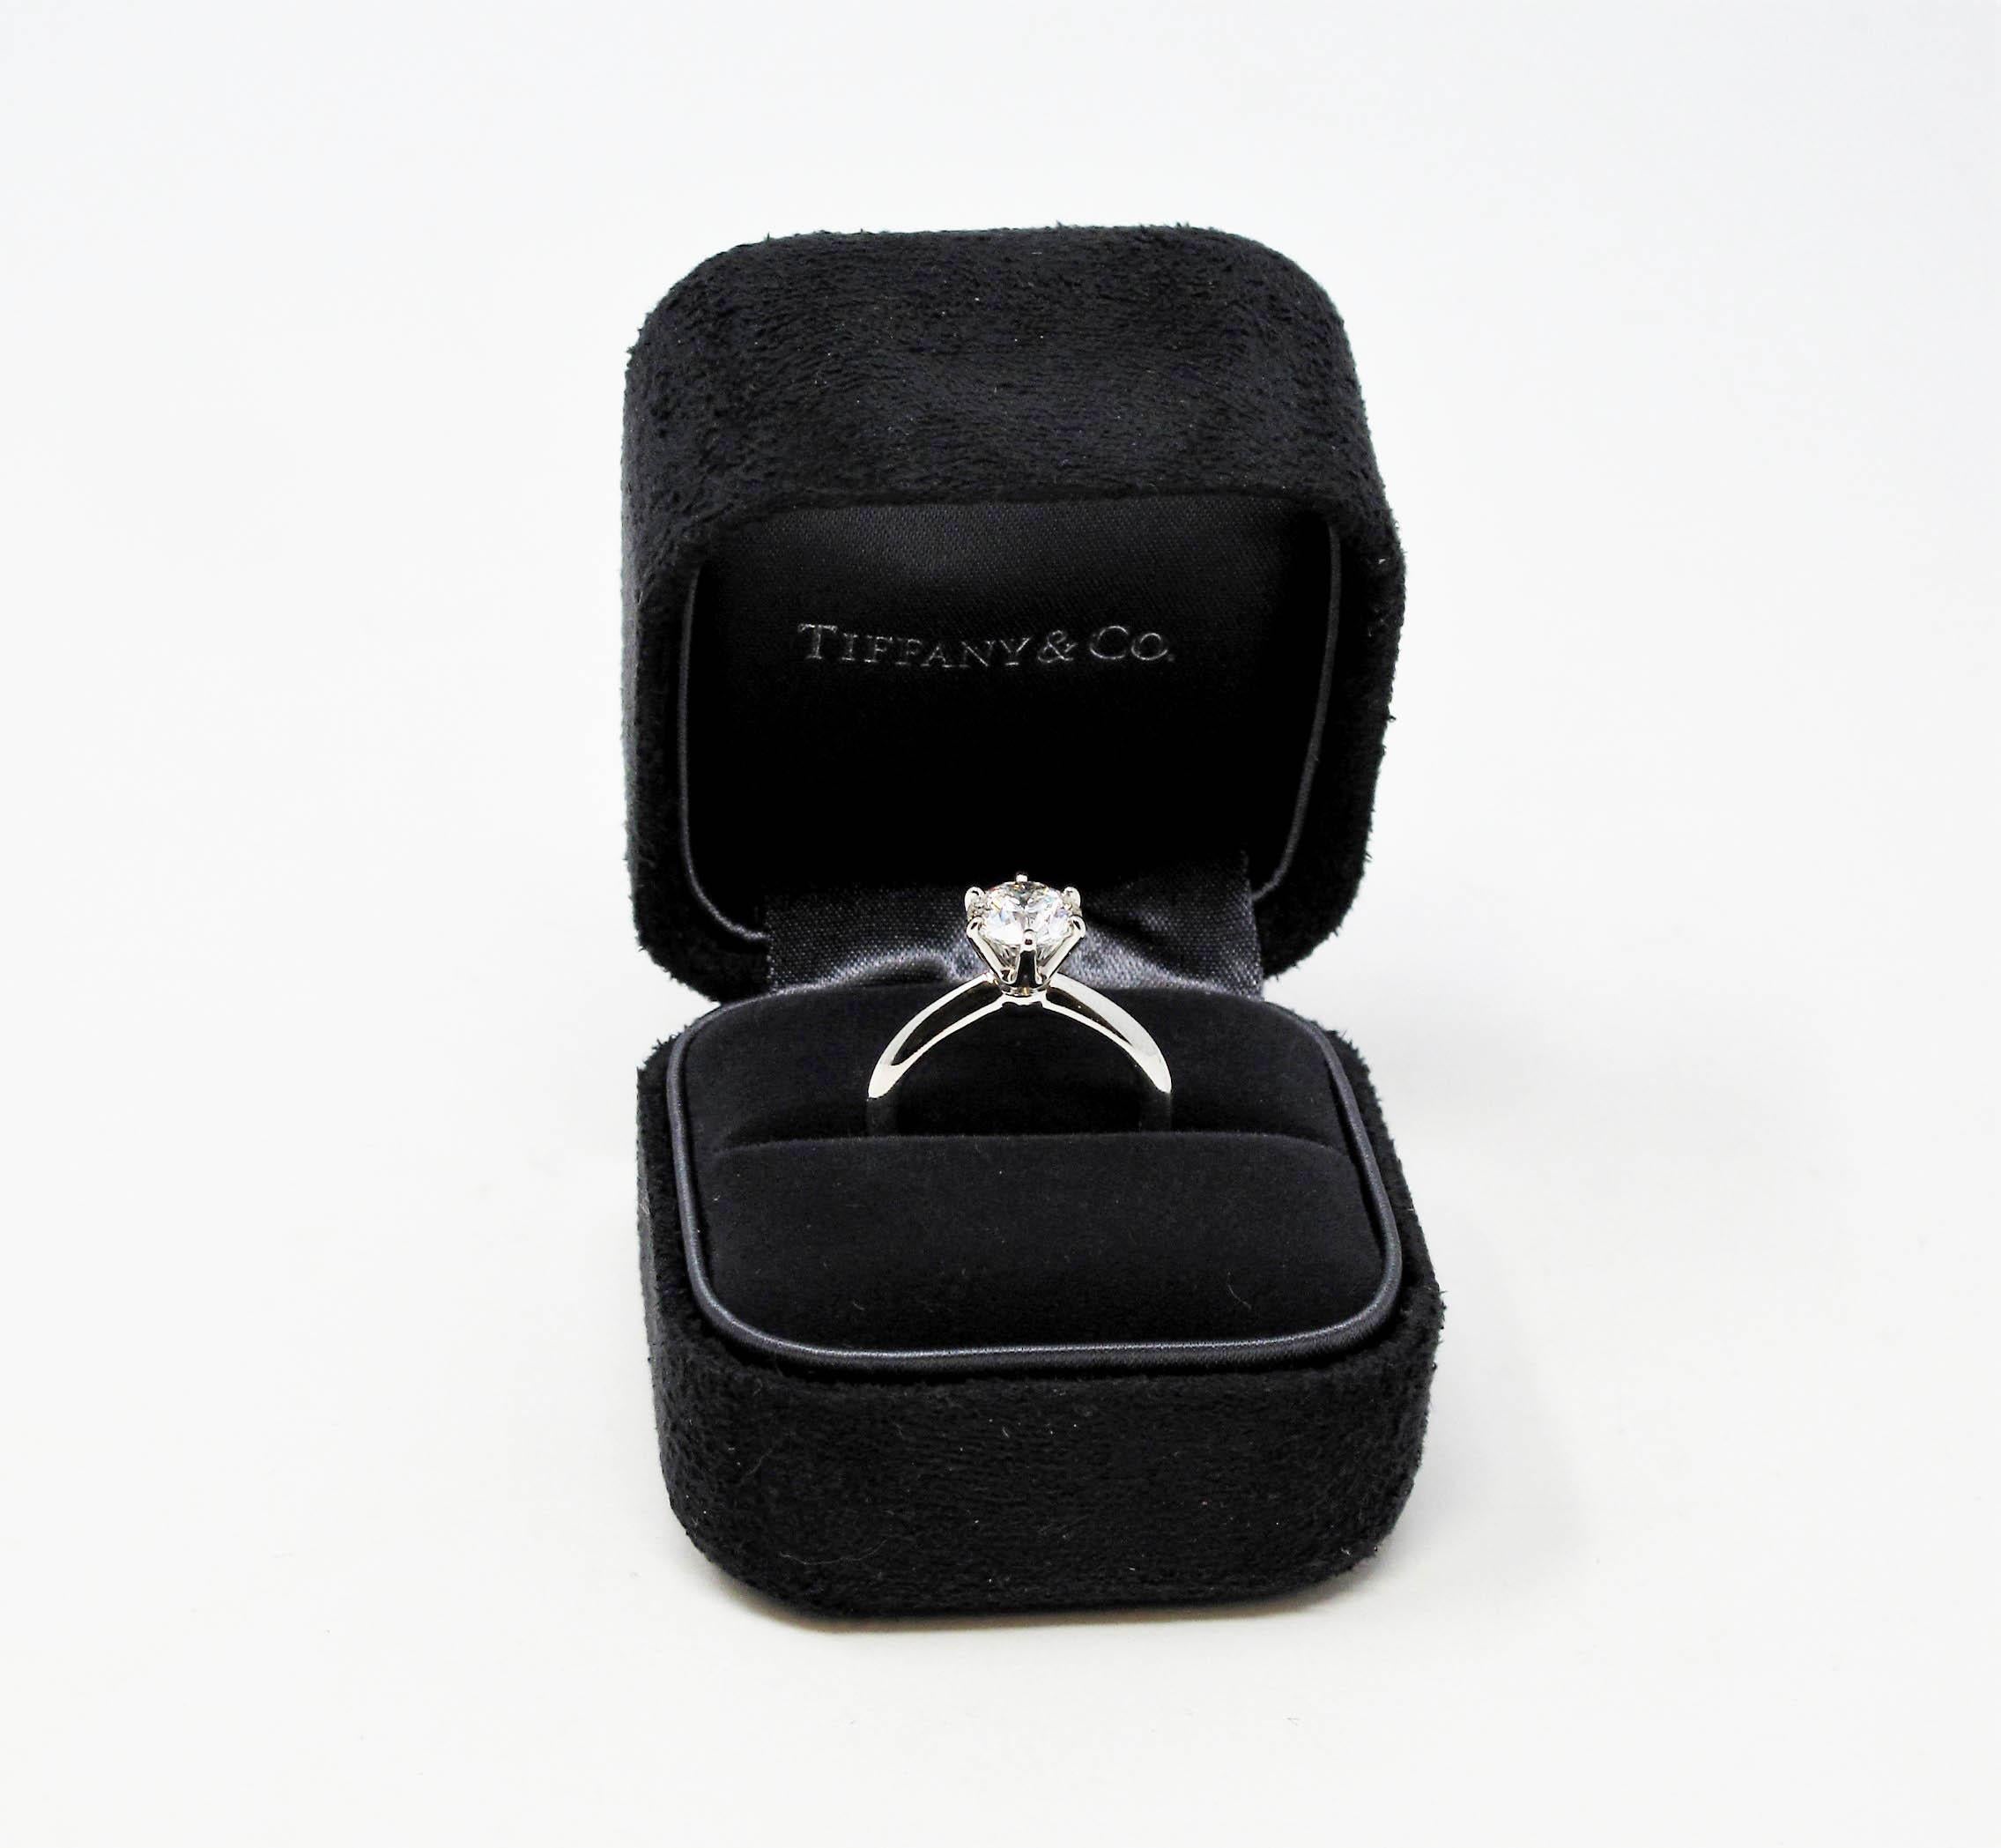 Say yes to this amazing diamond solitaire engagement ring from Tiffany & Co.! This classic, Tiffany style diamond solitaire ring is the epitome of timeless elegance. The round brilliant, bright icy white diamond sparkles radiantly on the finger,